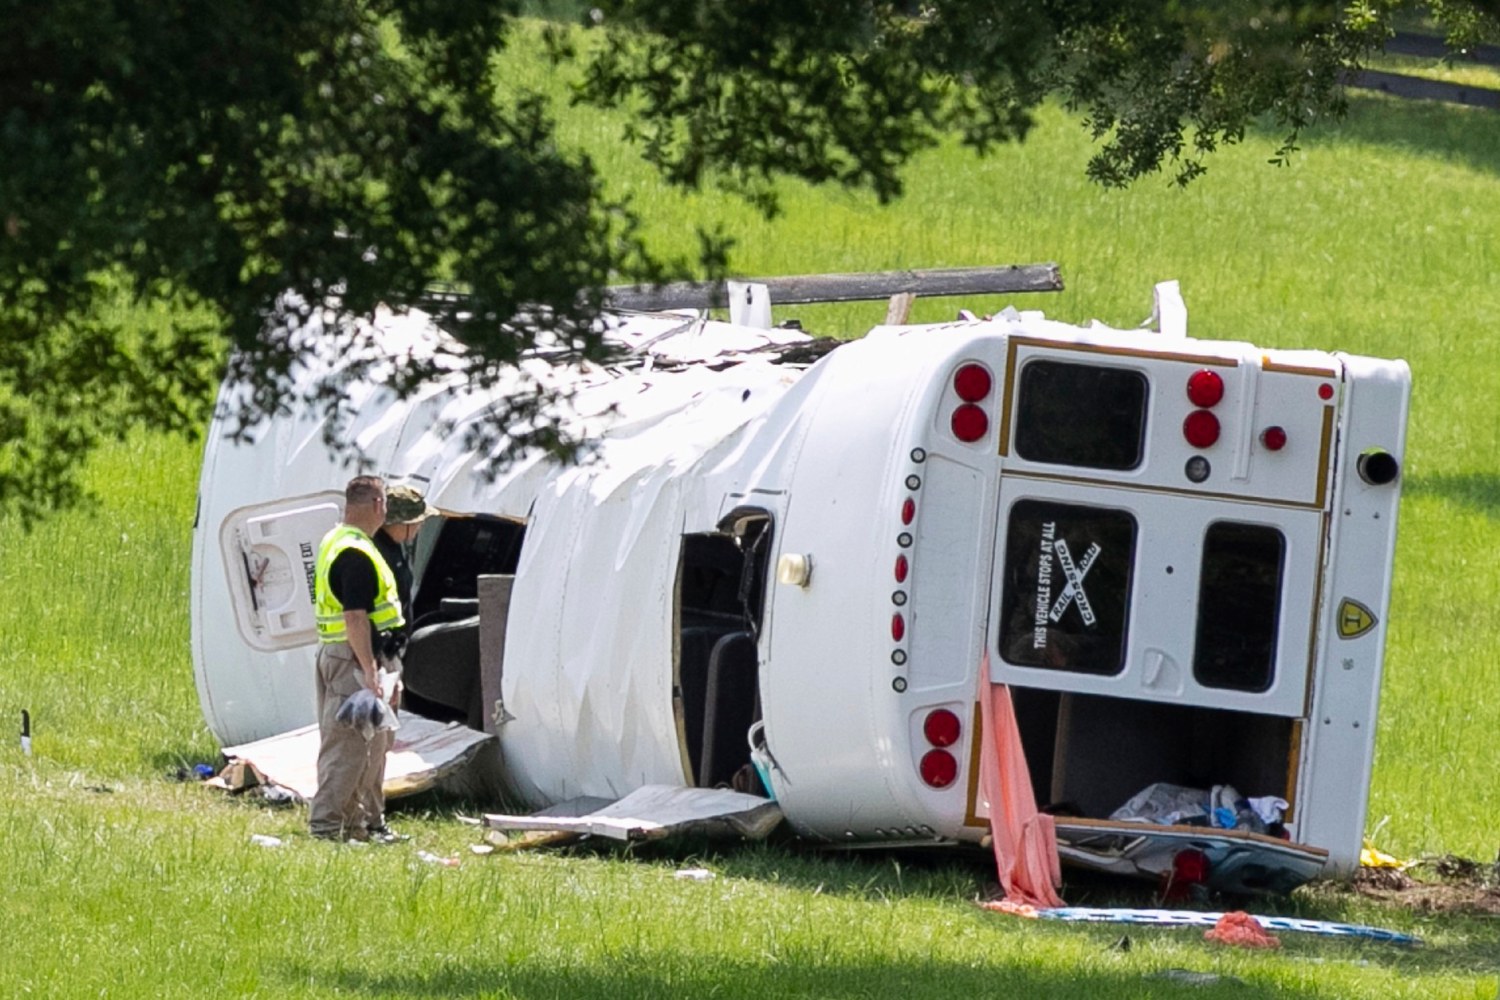 Driver in crash with bus that killed 8 farmworkers in Florida was in a crash 3 days earlier, judge says – NBC News